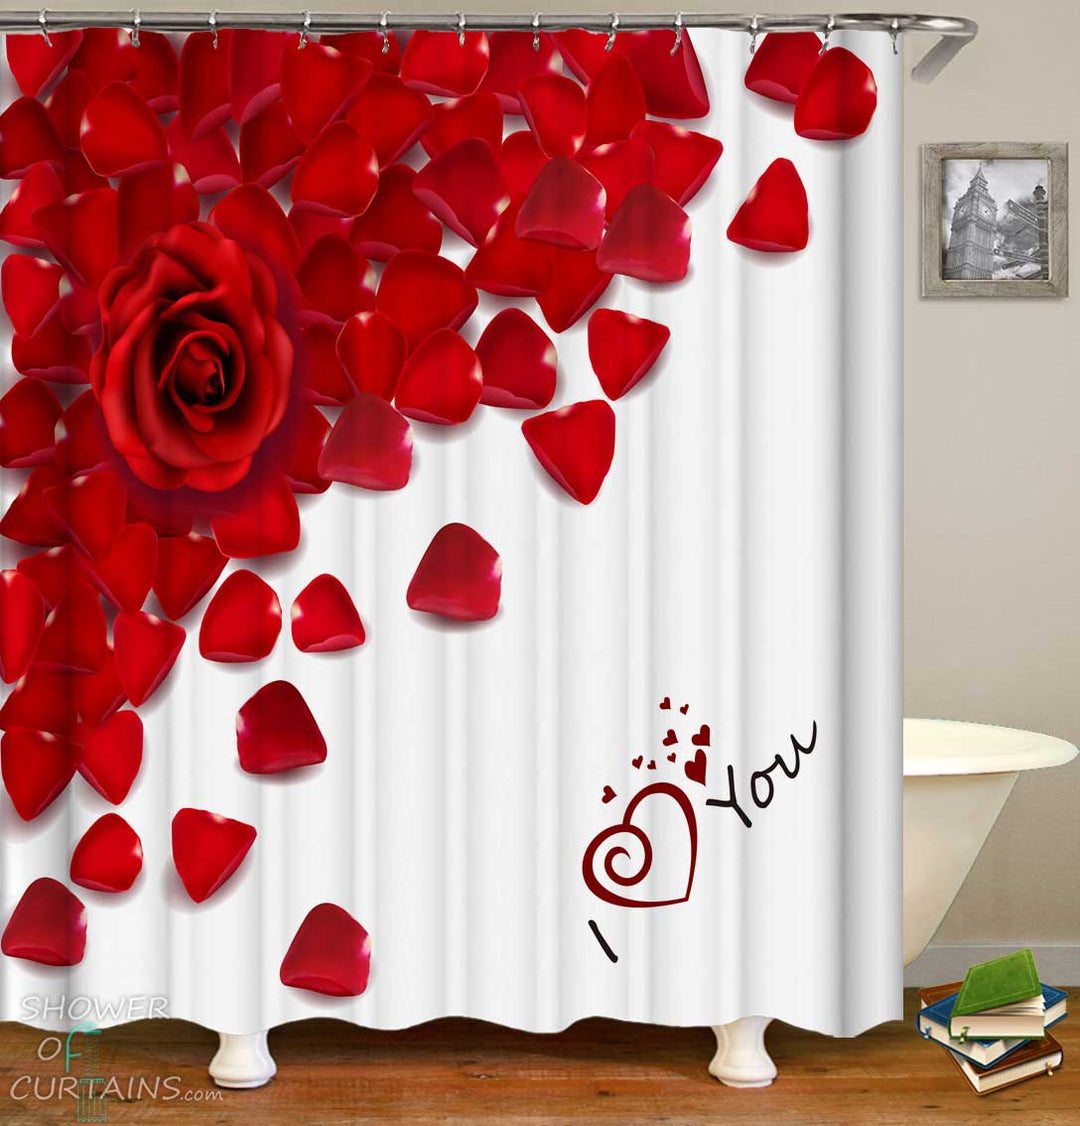 Shower Curtains with I Love You Roses Petals